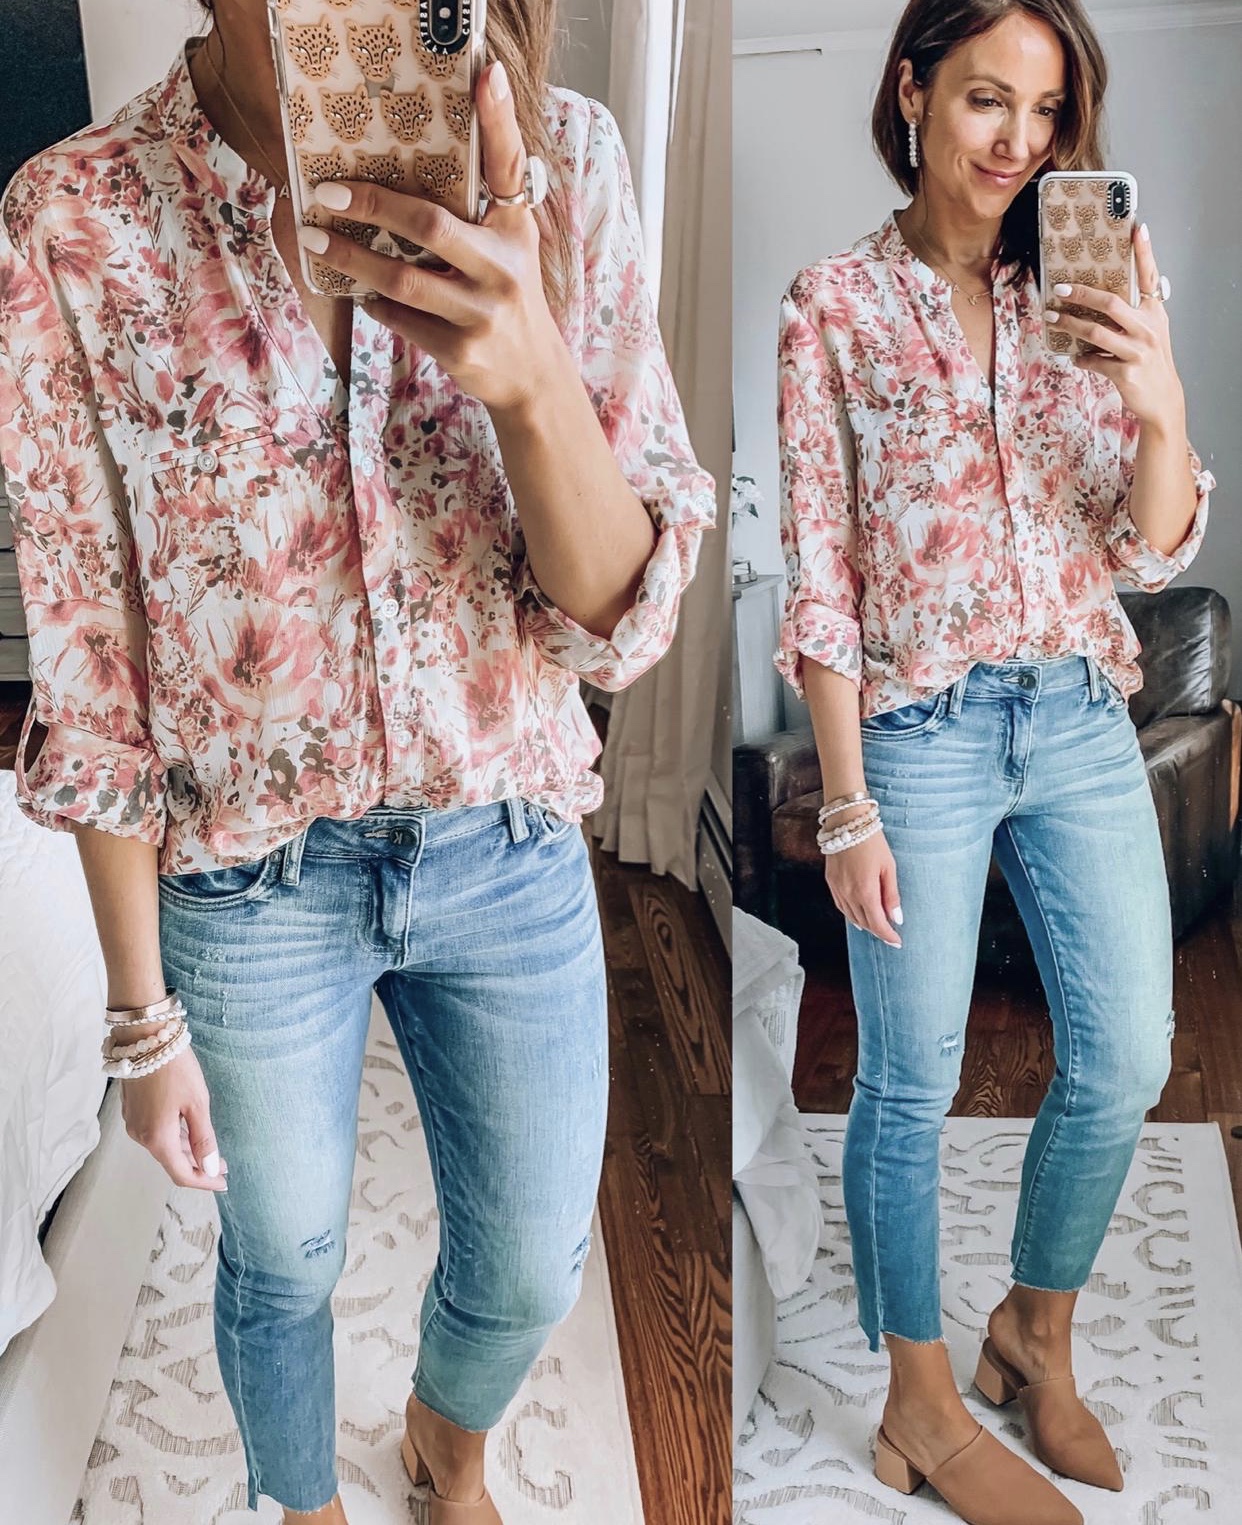 woman wearing floral top and jeans